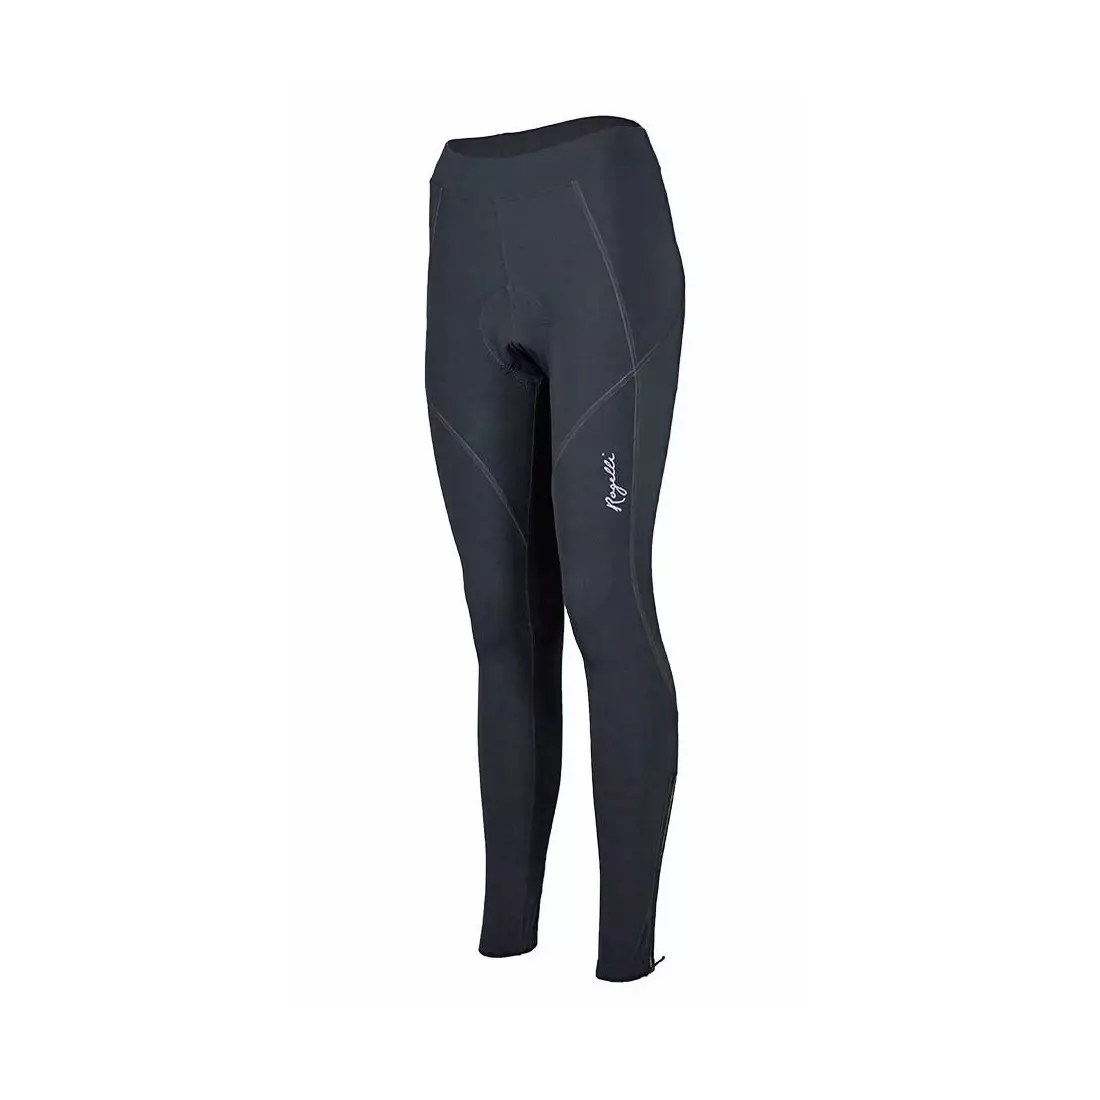 ROGELLI LUCETTE insulated women's cycling pants 010.216 black